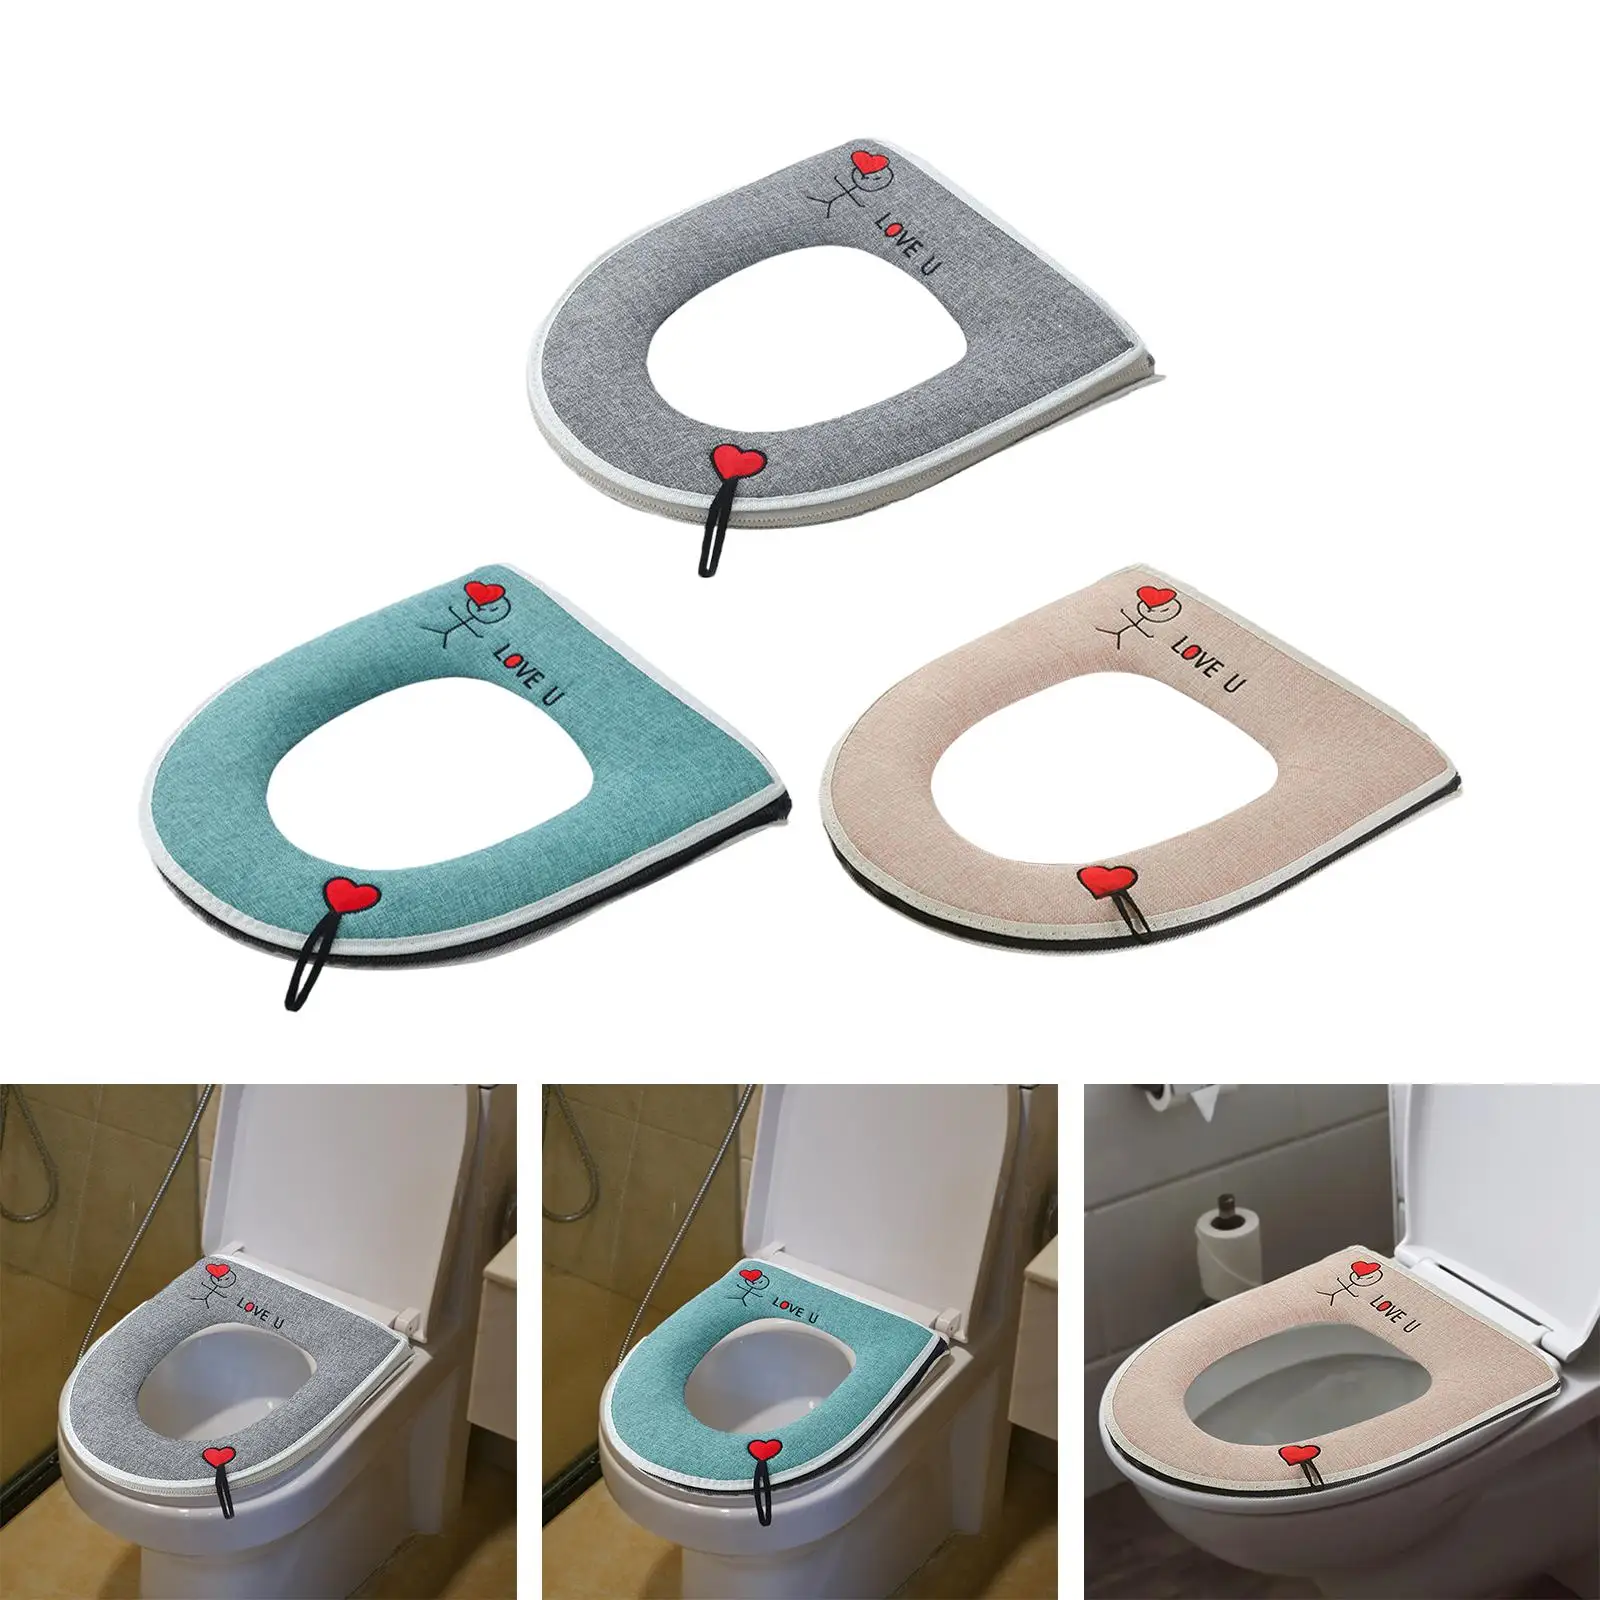 Thicken Toilet Seat Cushion Comfortable Foldable Reusable Soft Portable Warm Toilet Seat Covers for Household Bathroom Traveling